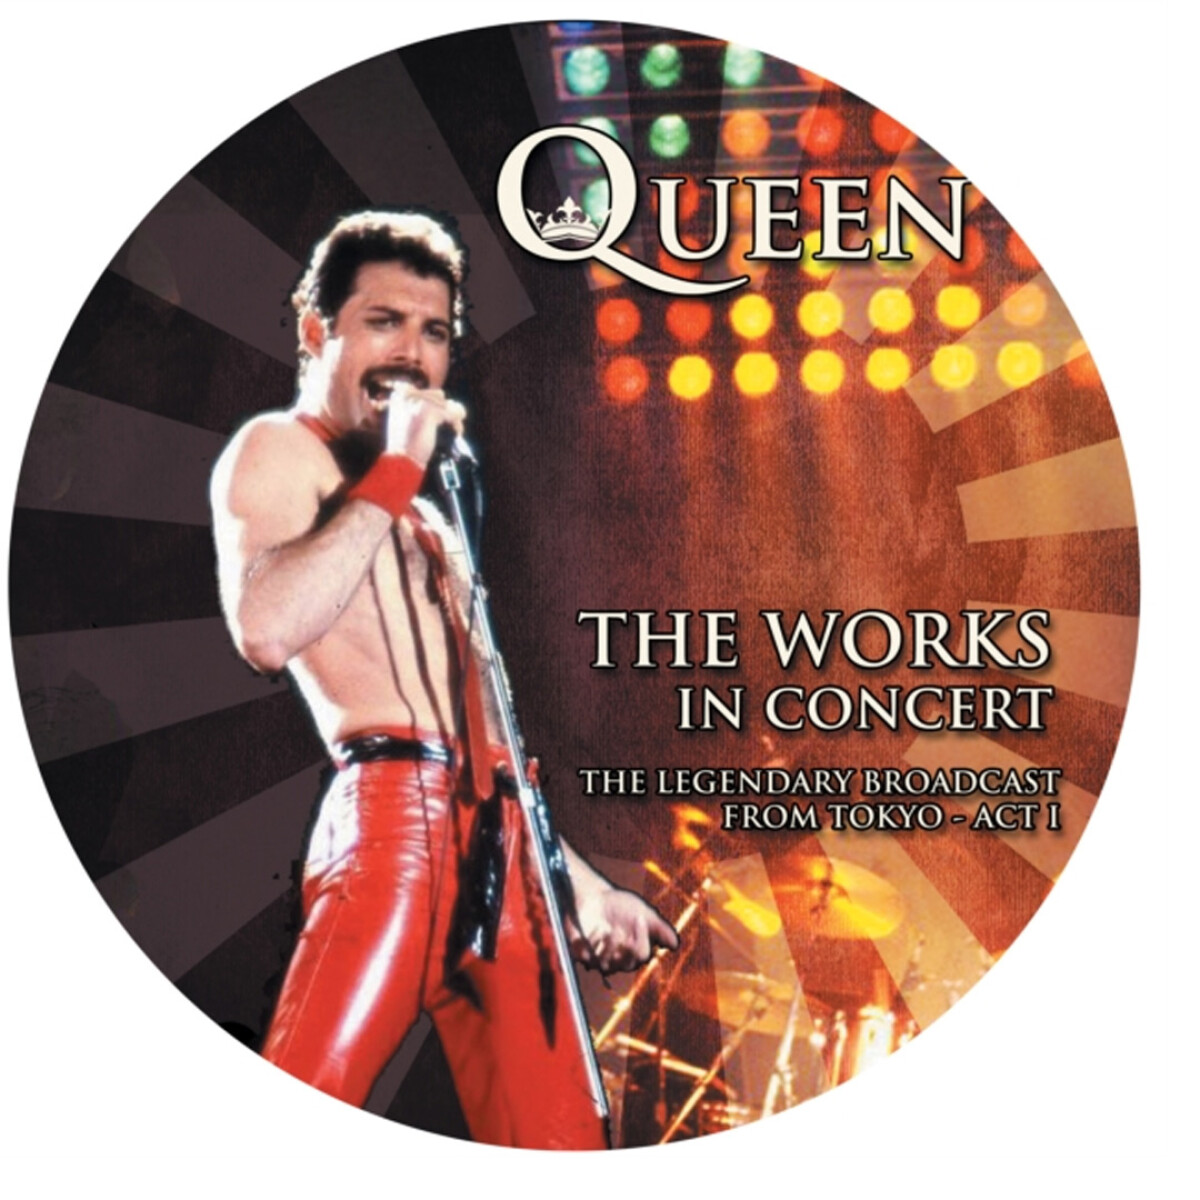 (l) Queen - The Works In Concert (picture Disc) - Vinilo 